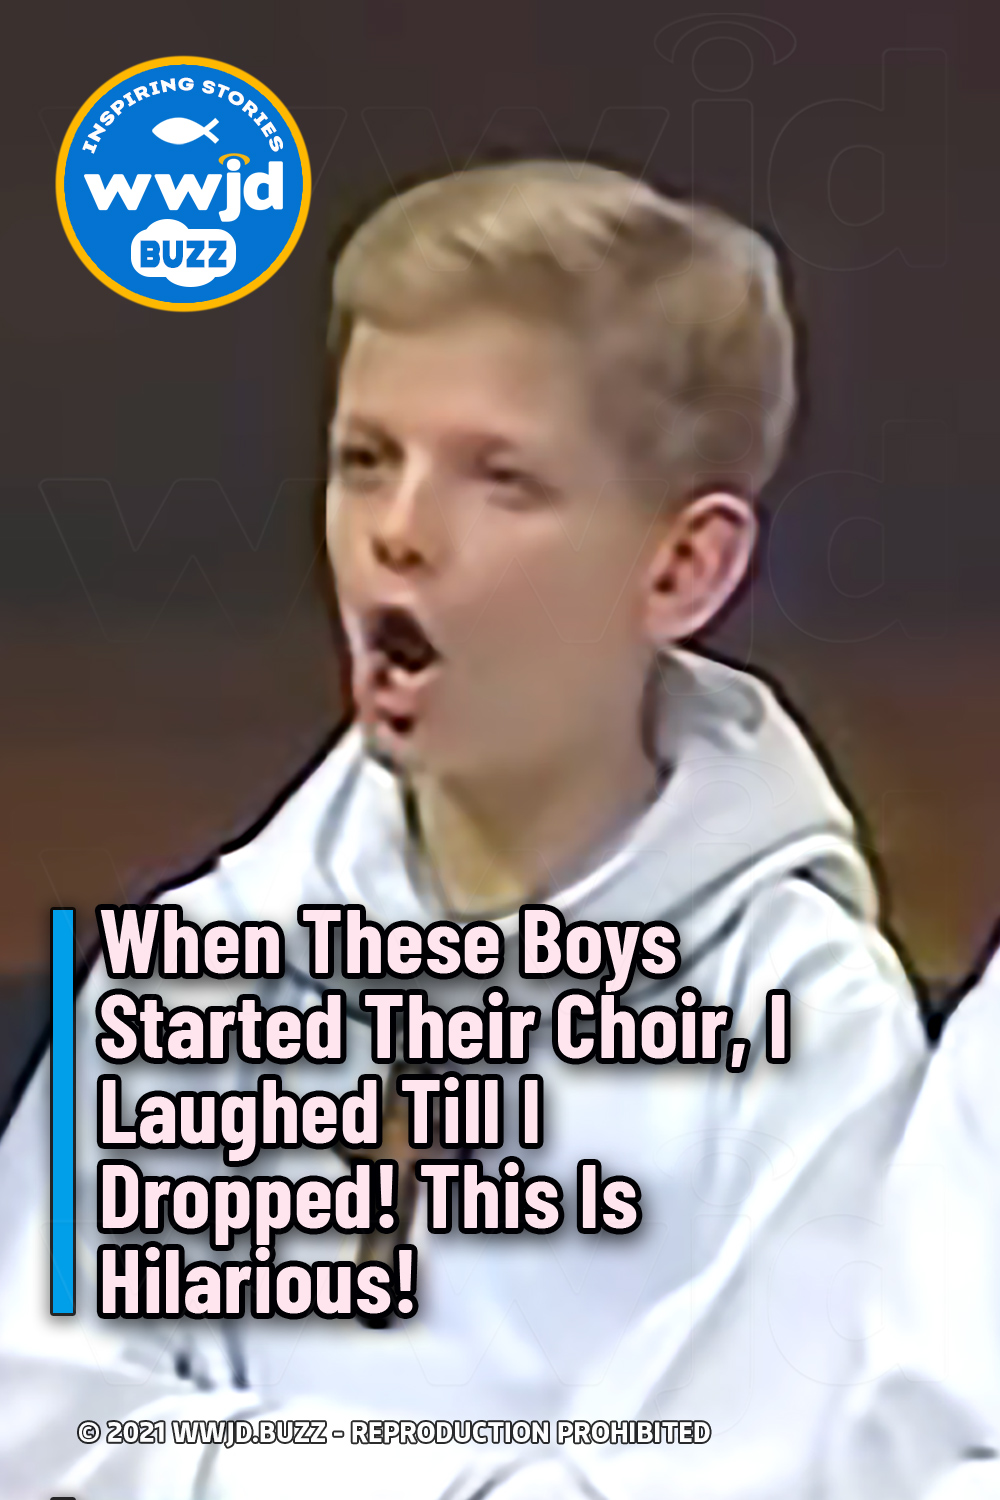 When These Boys Started Their Choir, I Laughed Till I Dropped! This Is Hilarious!